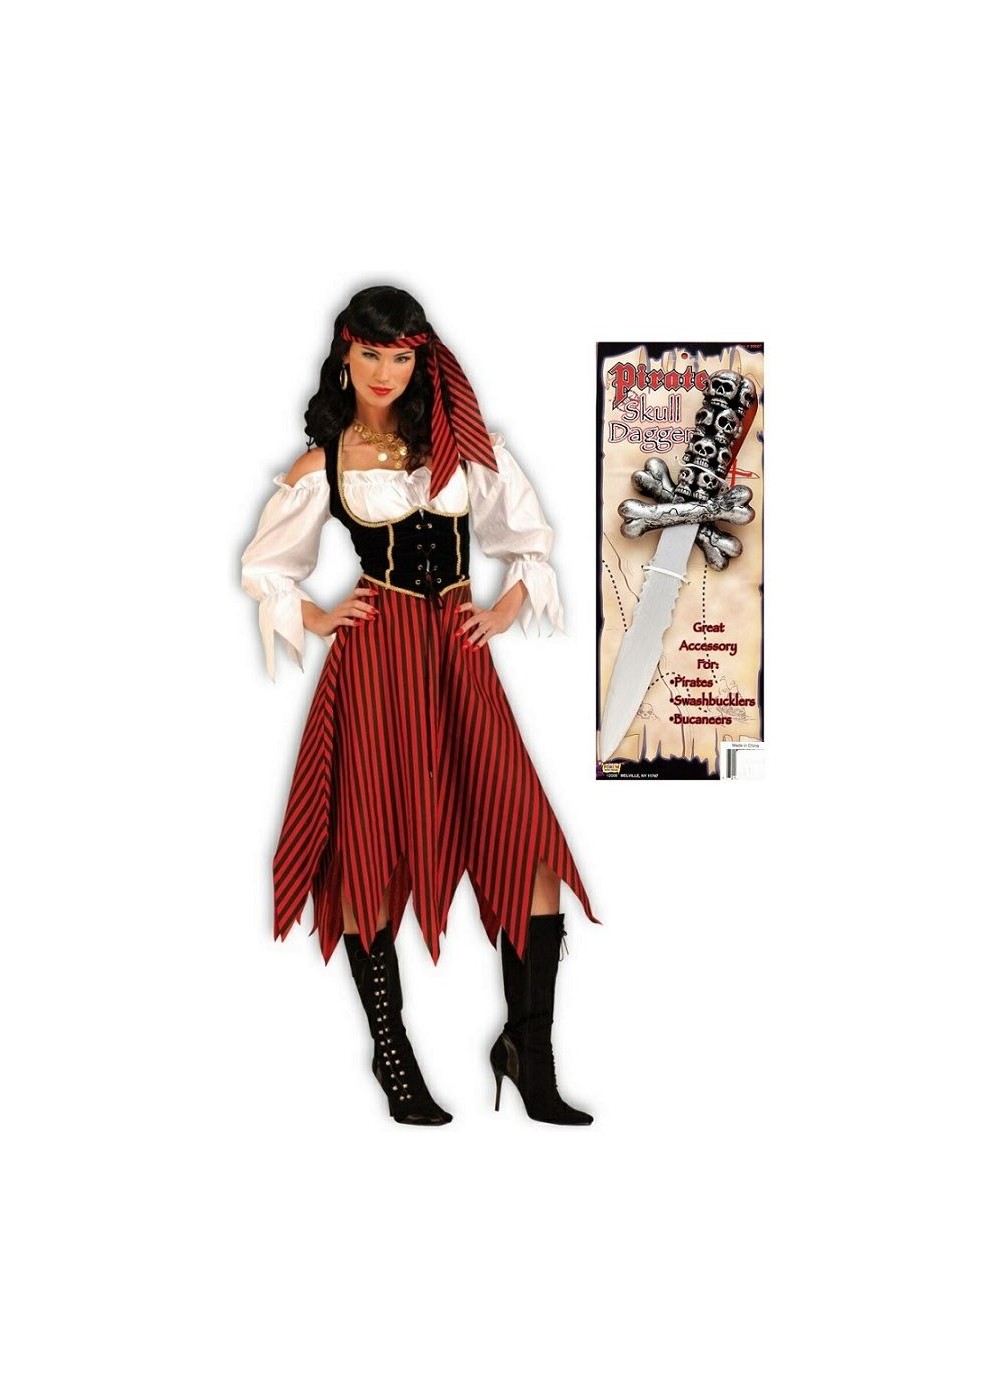 Pirate Maiden Woman Costume And Skull Dagger Set